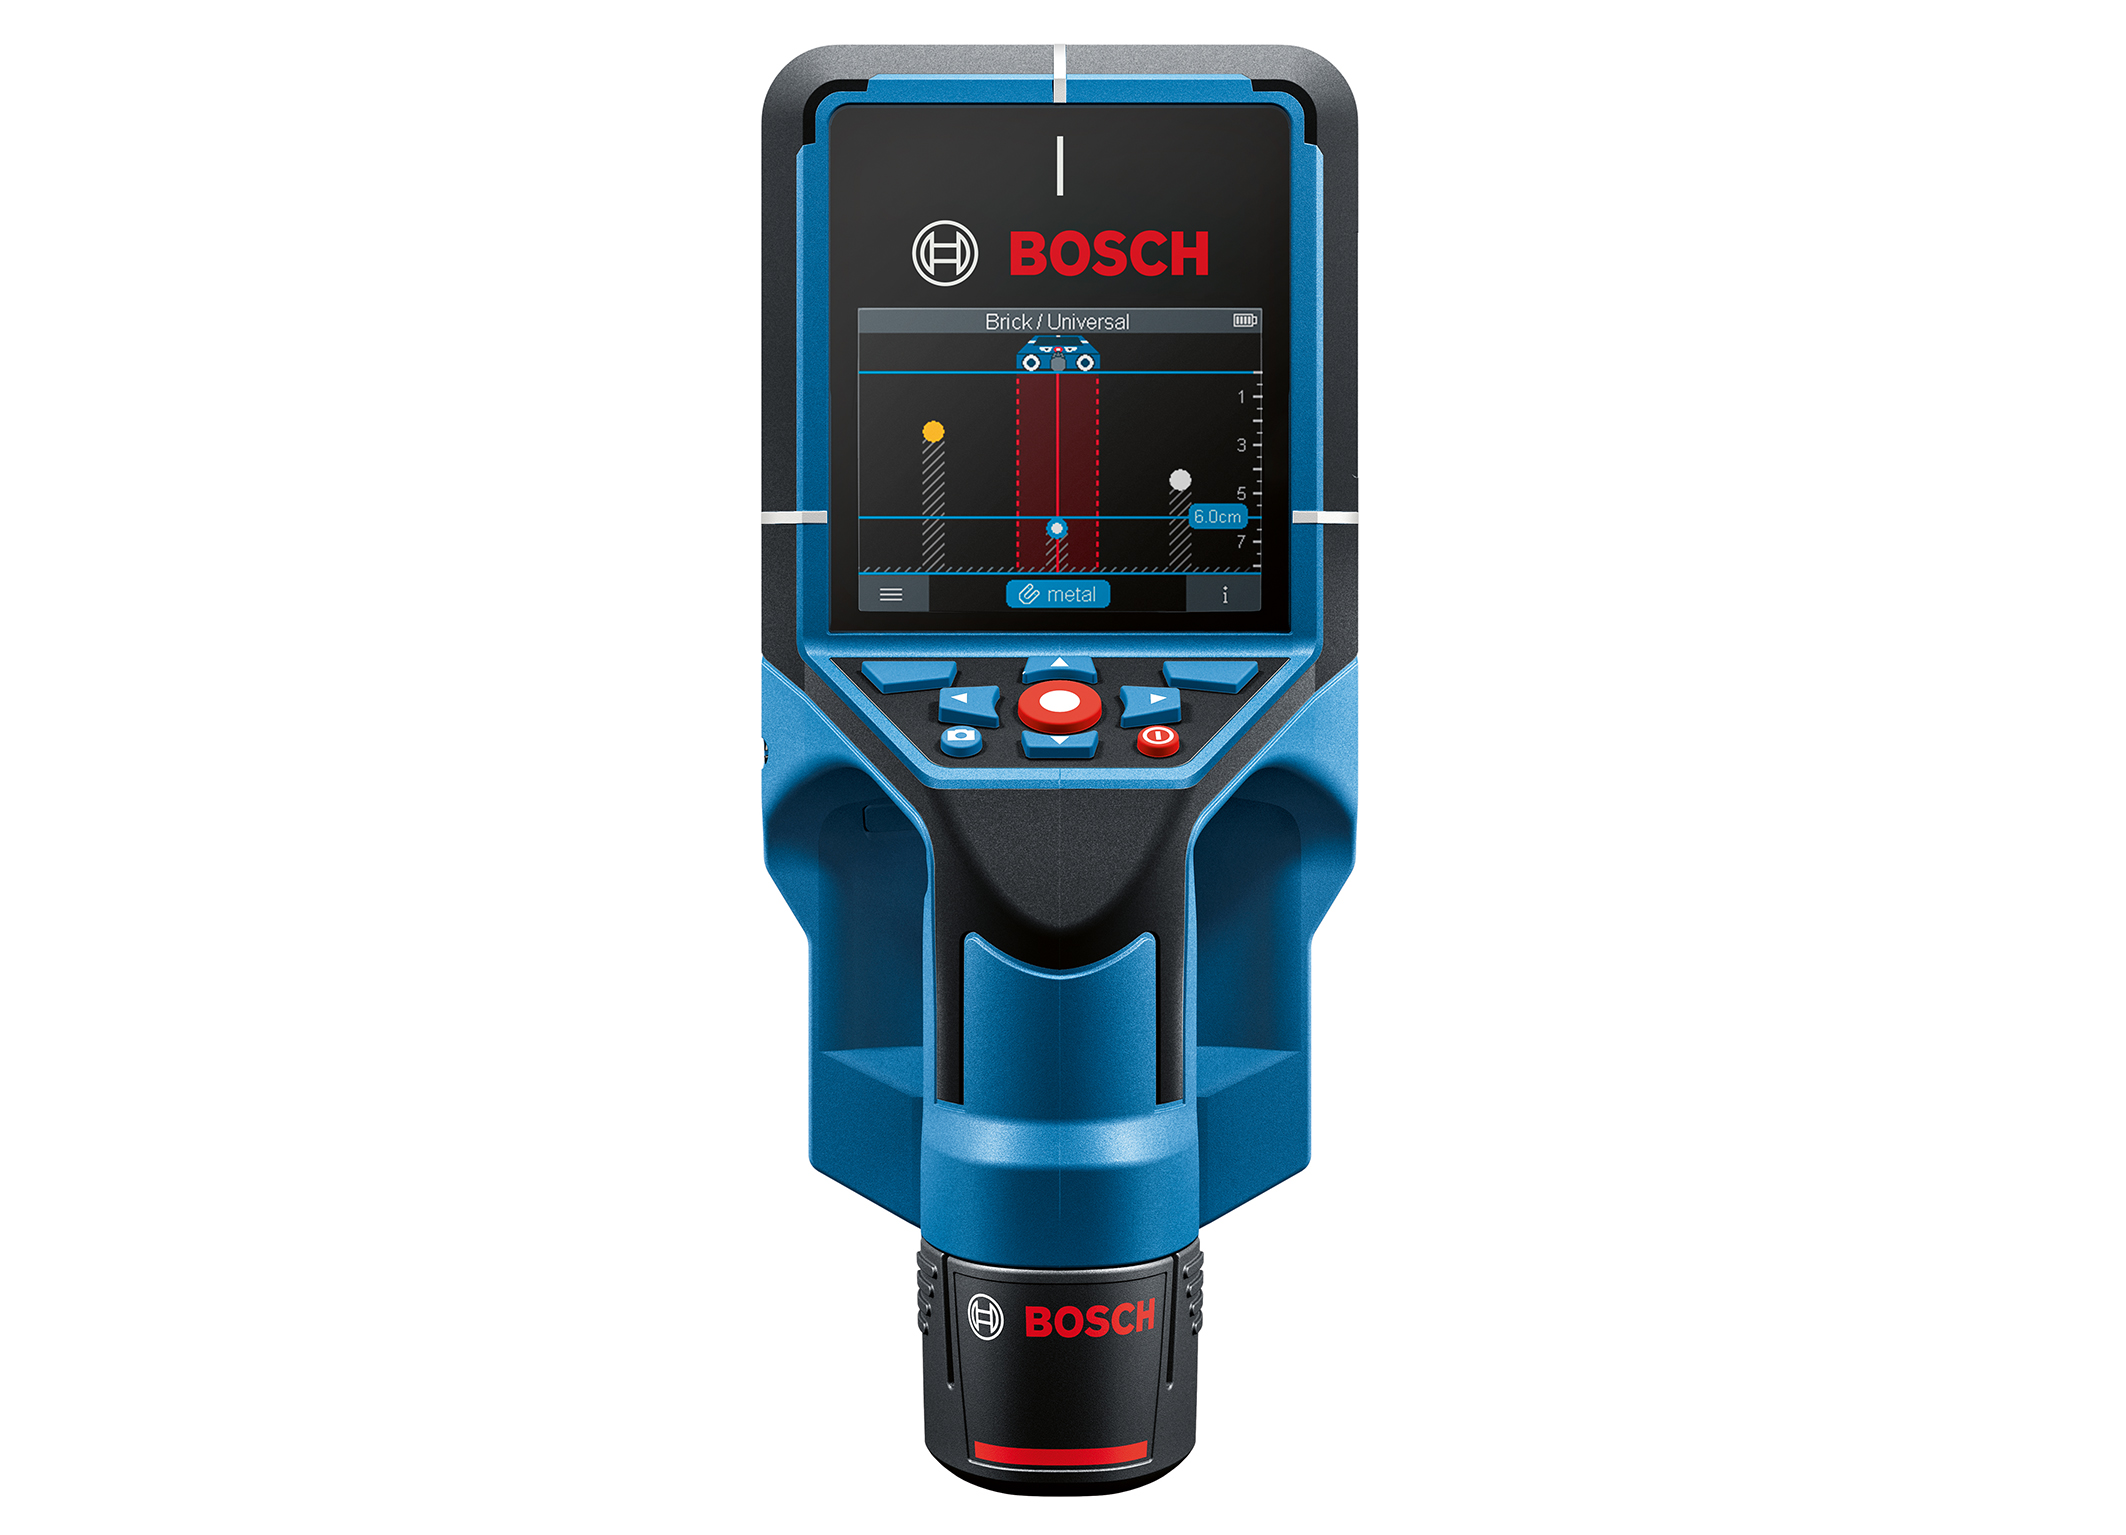 Bosch D-TECT 120 Wall and Floor Scanner with Radar for sale online